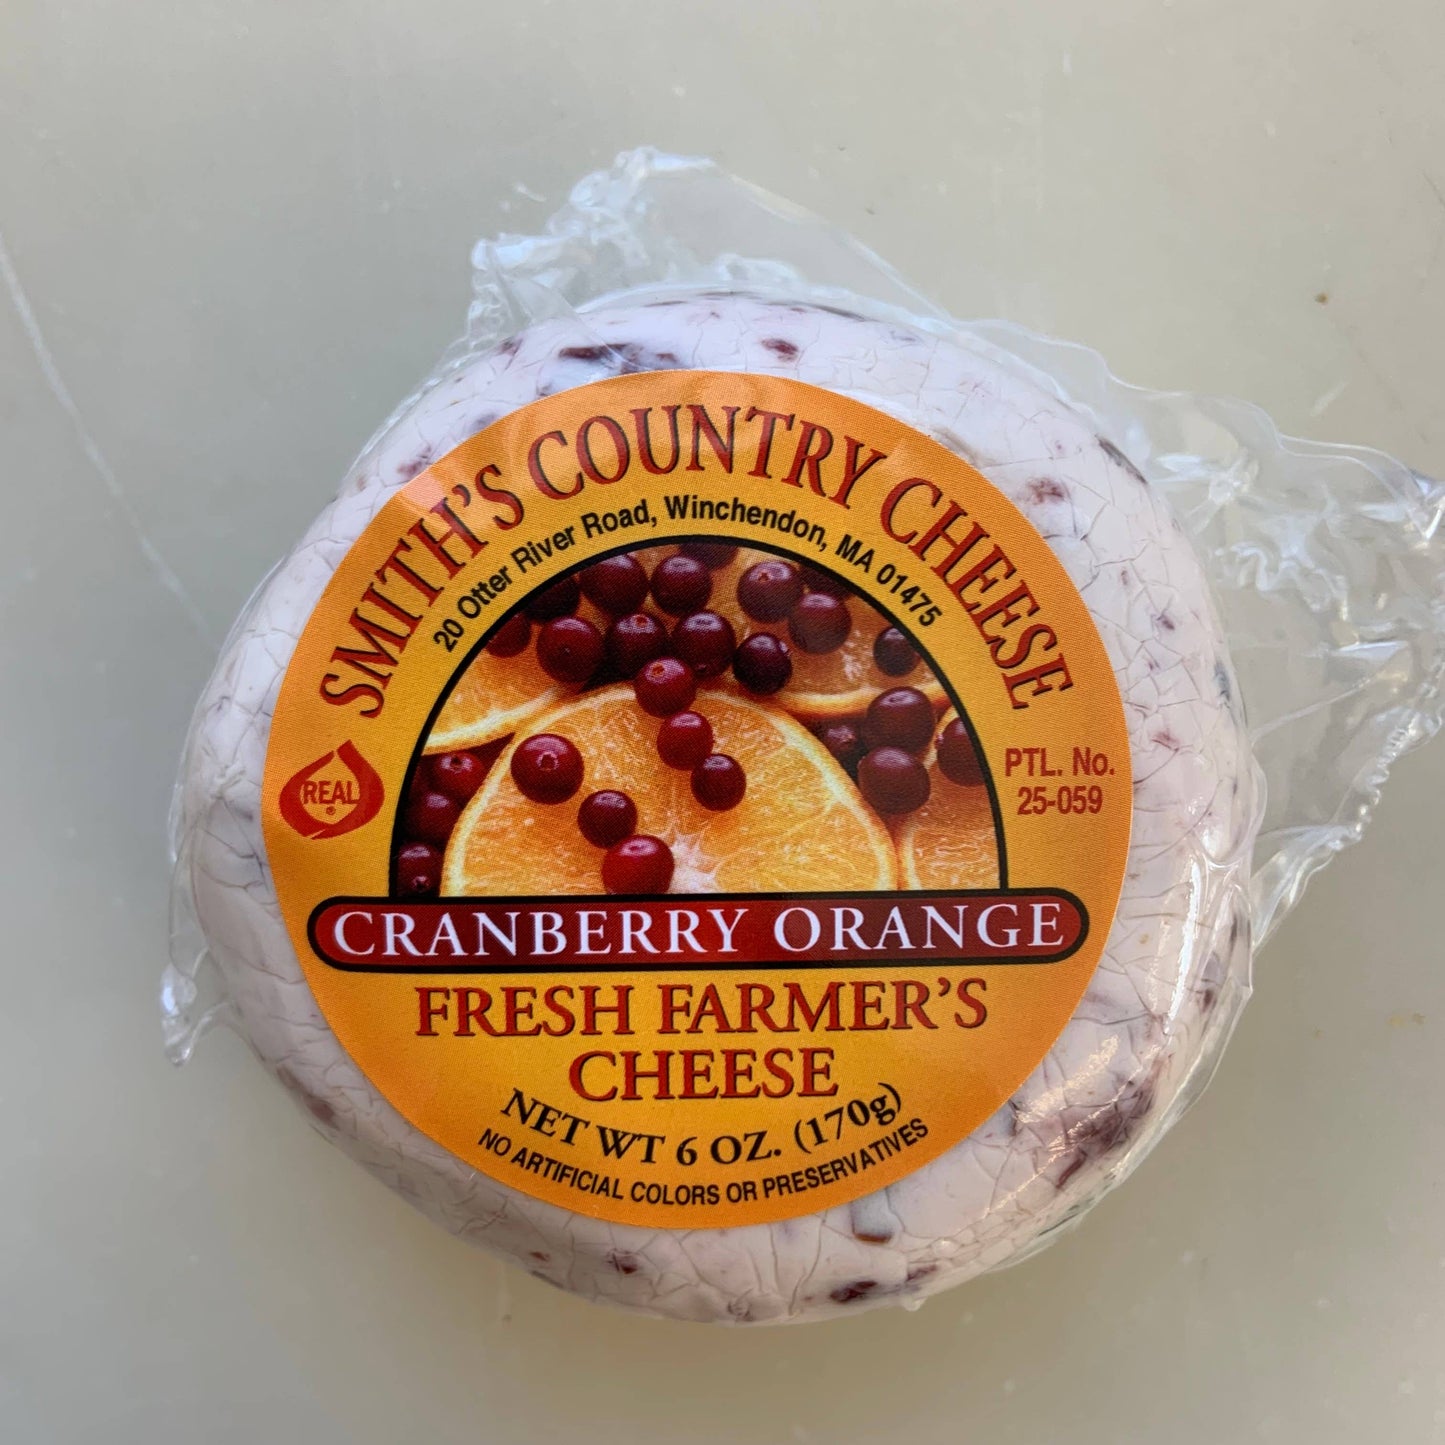 Smith's Country Cheese - Cranberry & Orange Farmer's Cheese